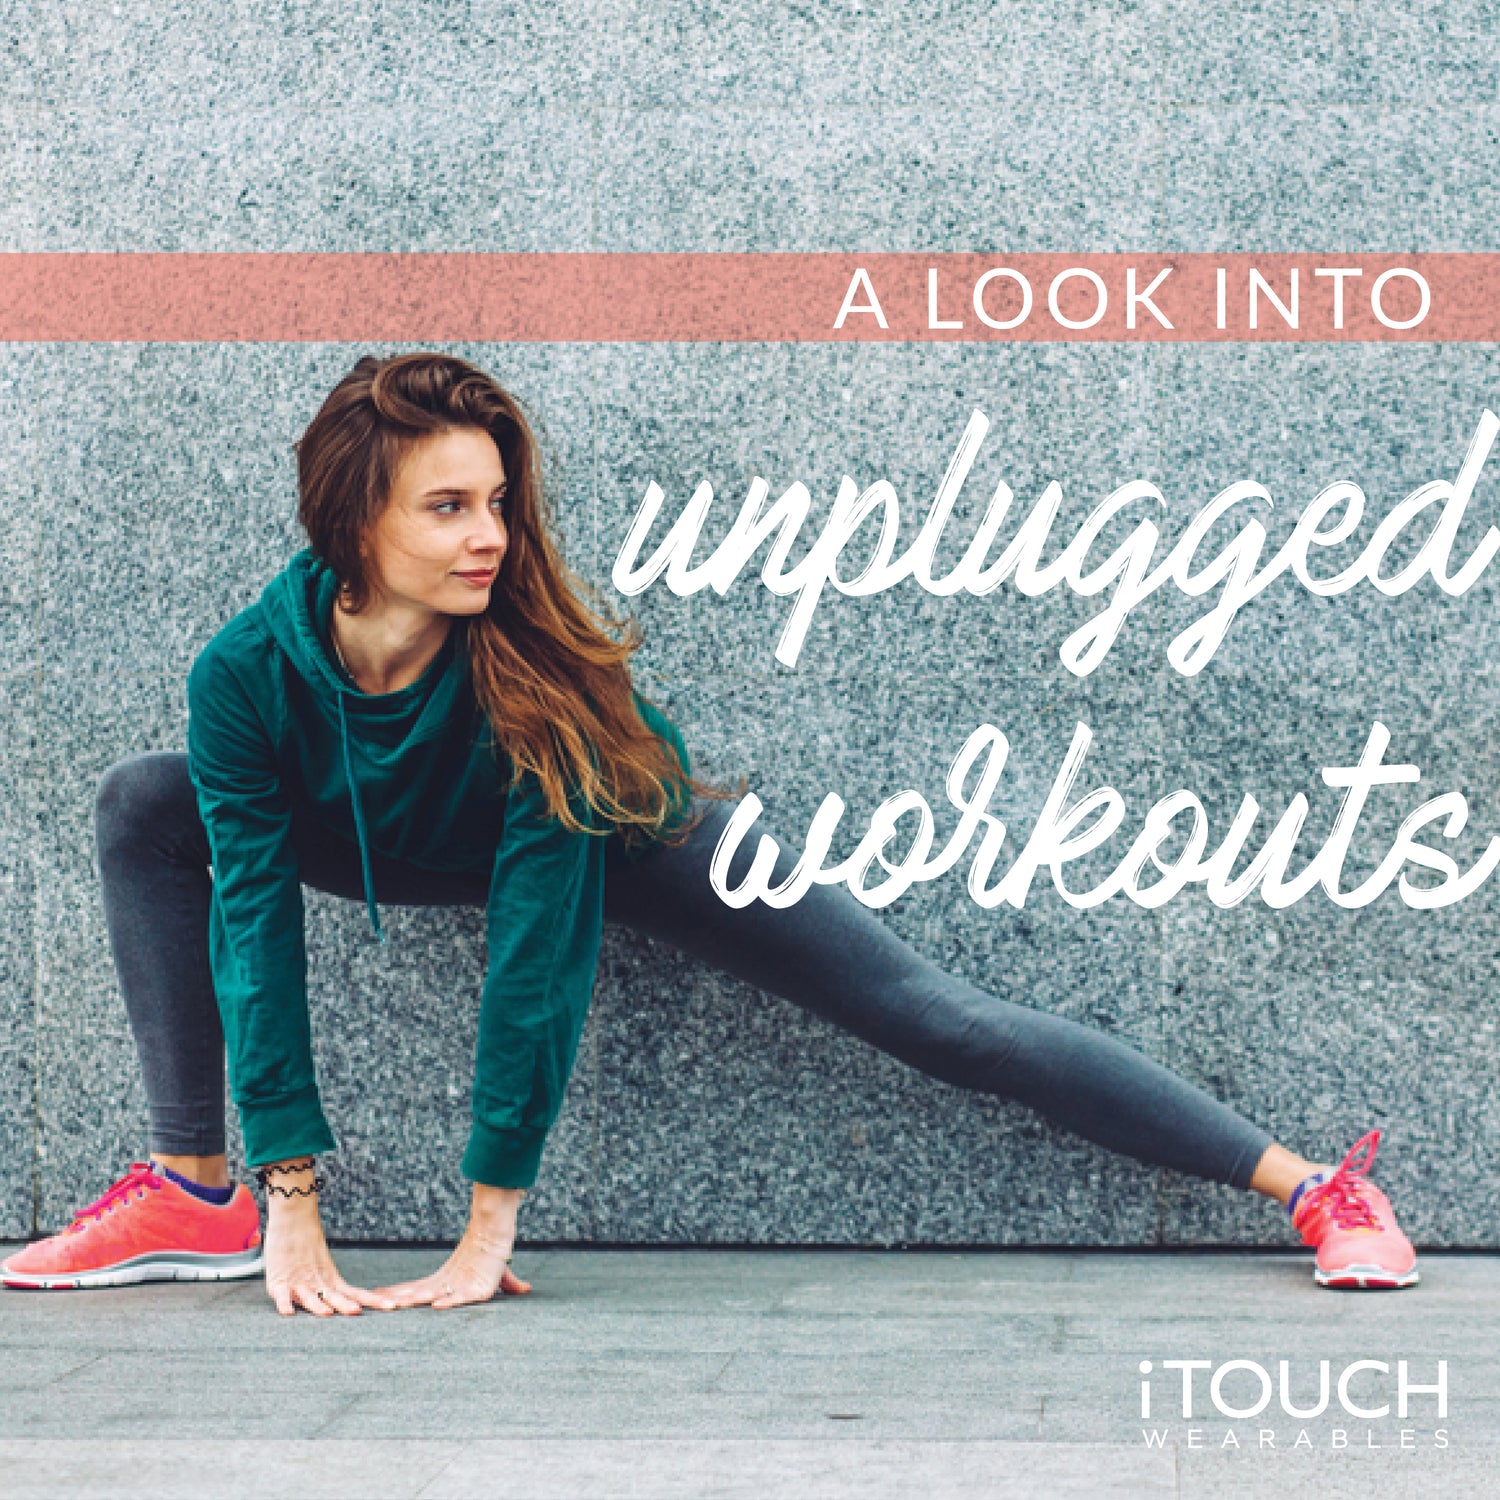 A Look Into Unplugged Workouts